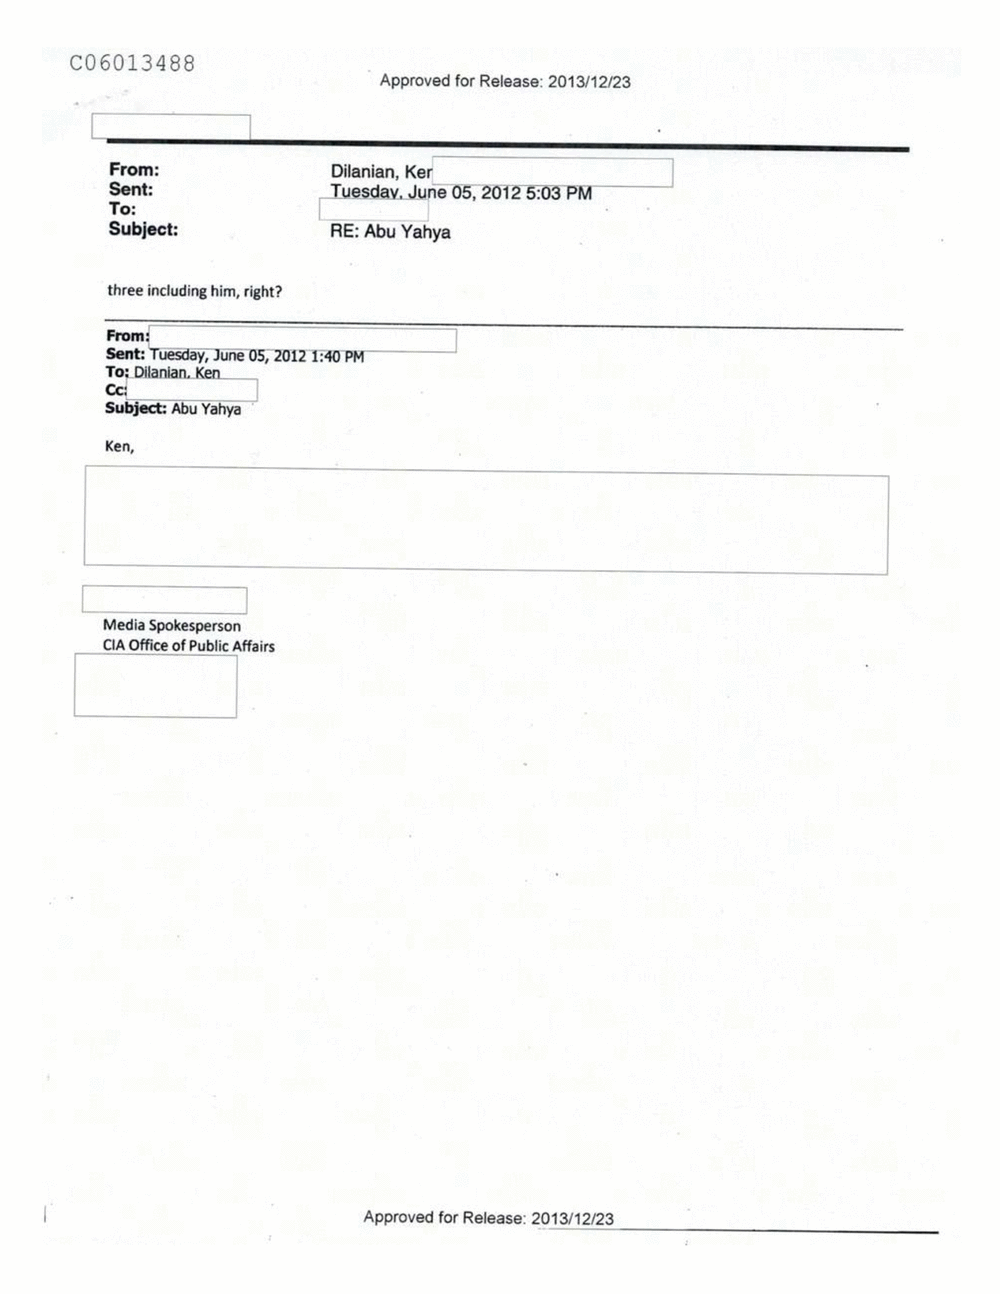 Page 340 from Email Correspondence Between Reporters and CIA Flacks